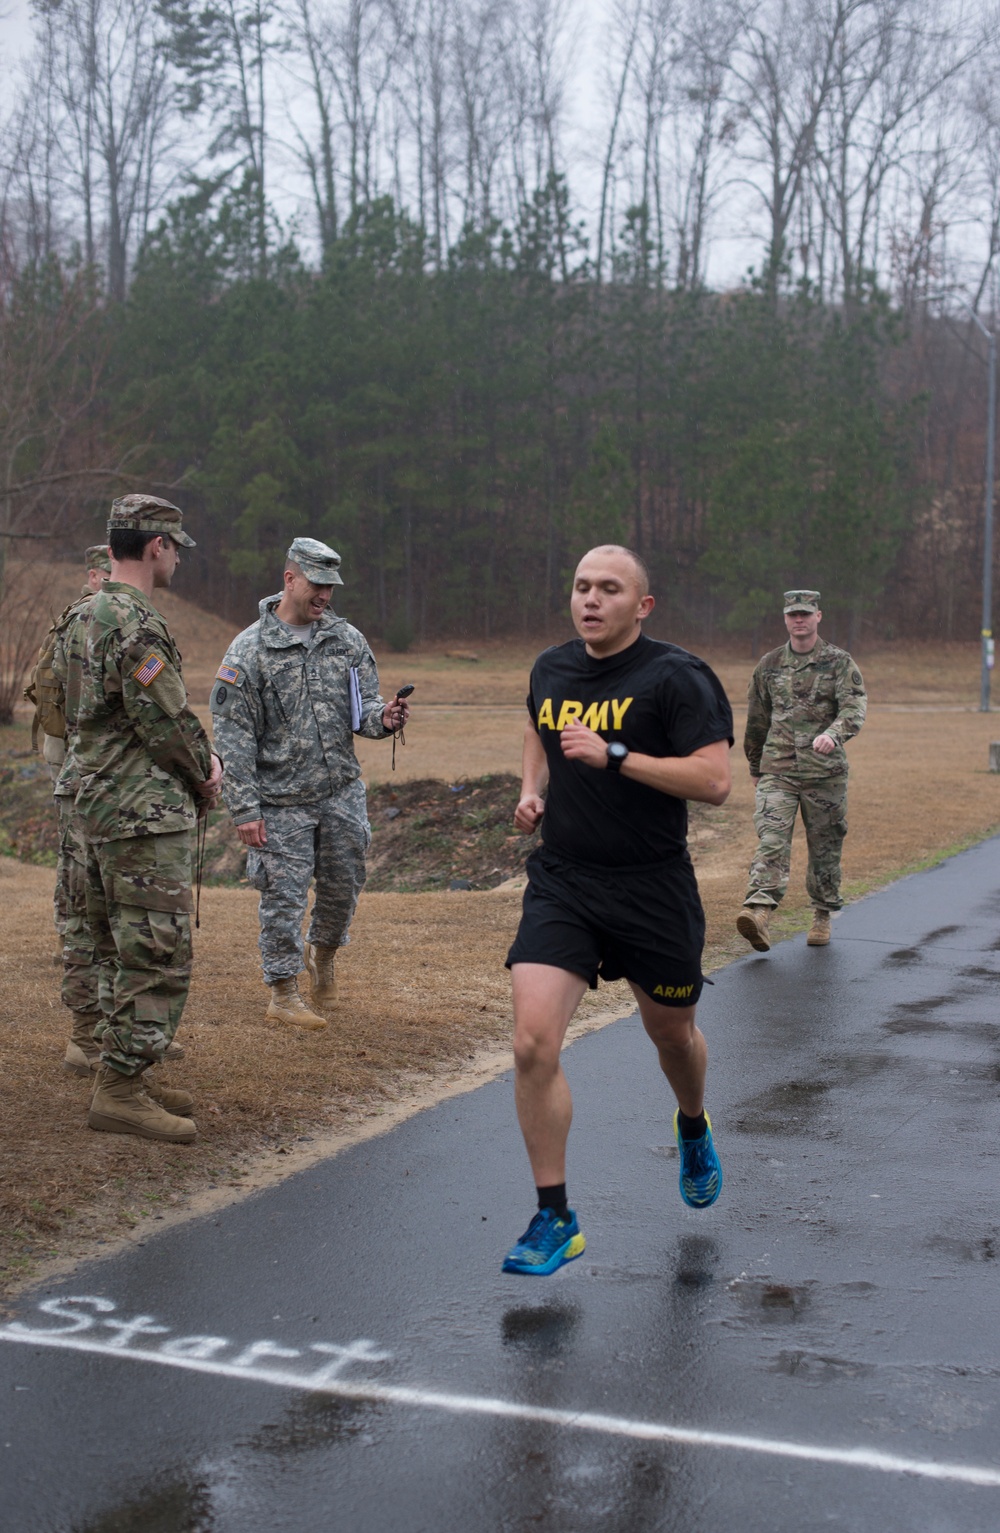 60th TC Soldiers compete to be named the best